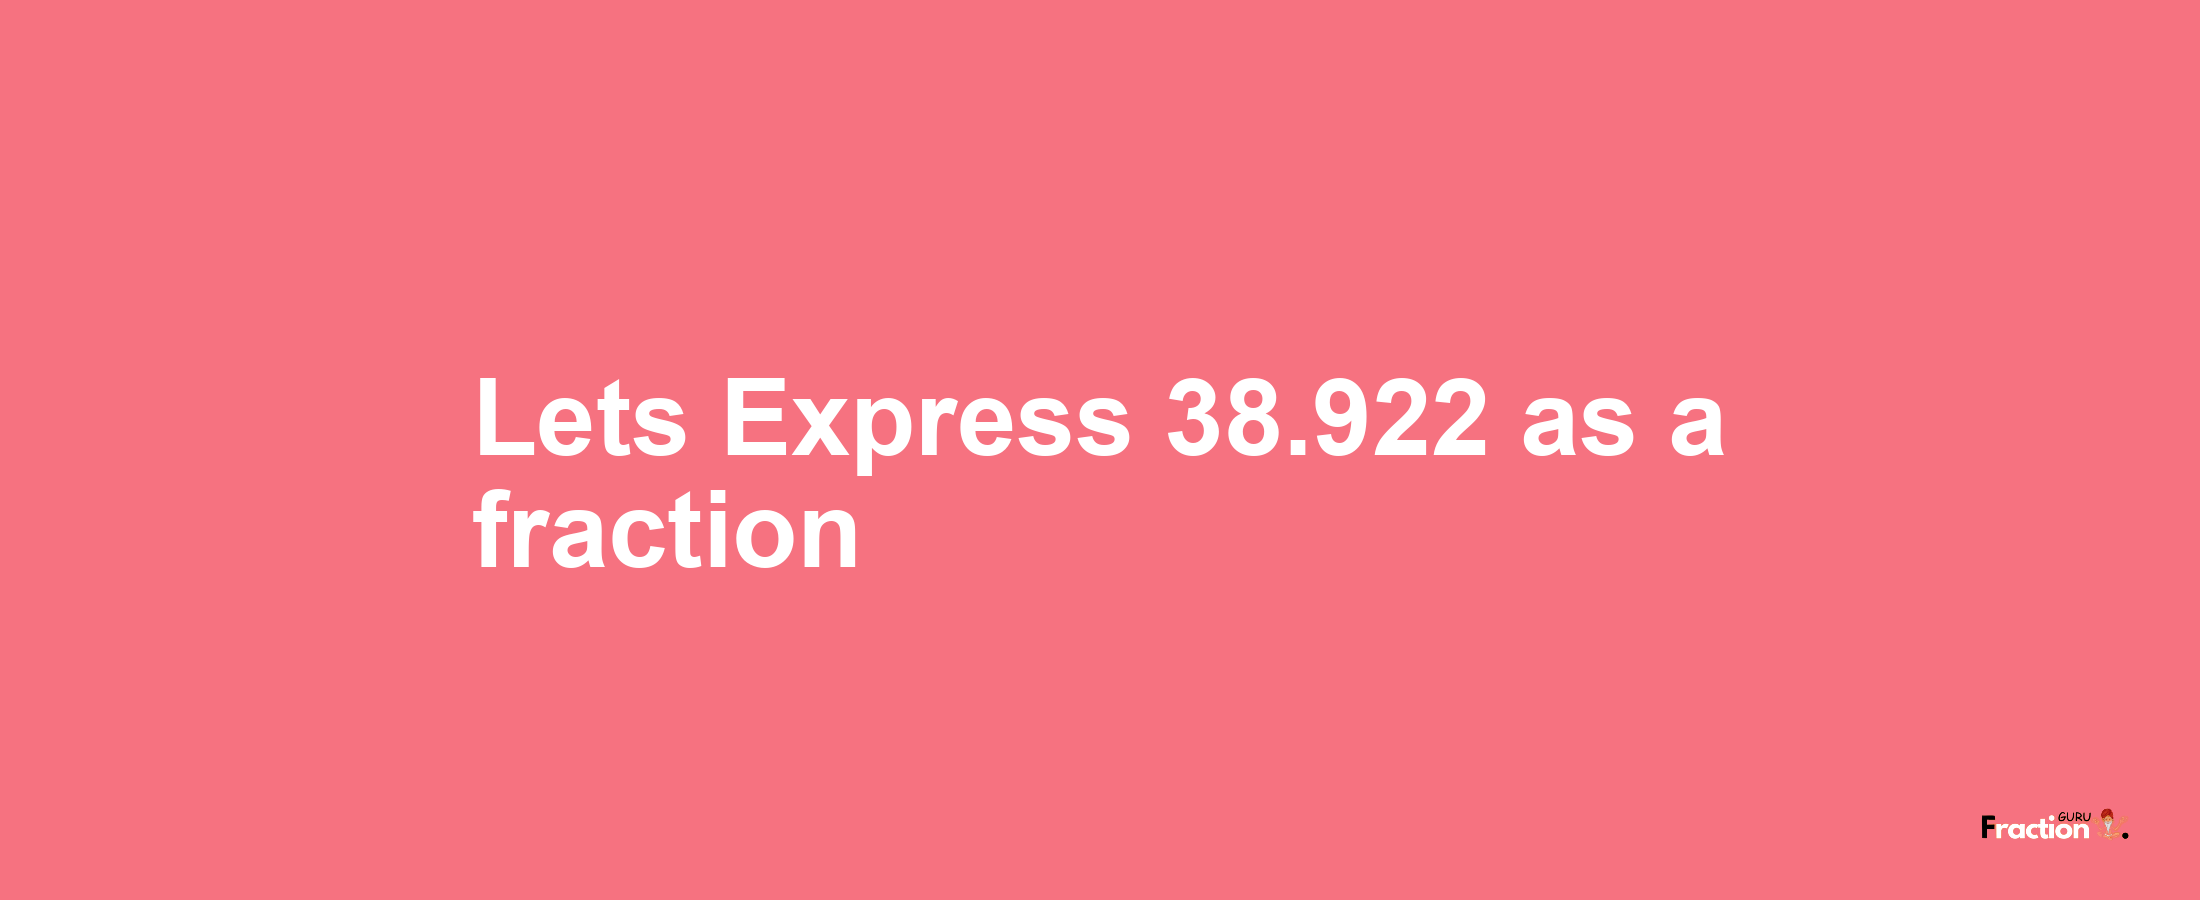 Lets Express 38.922 as afraction